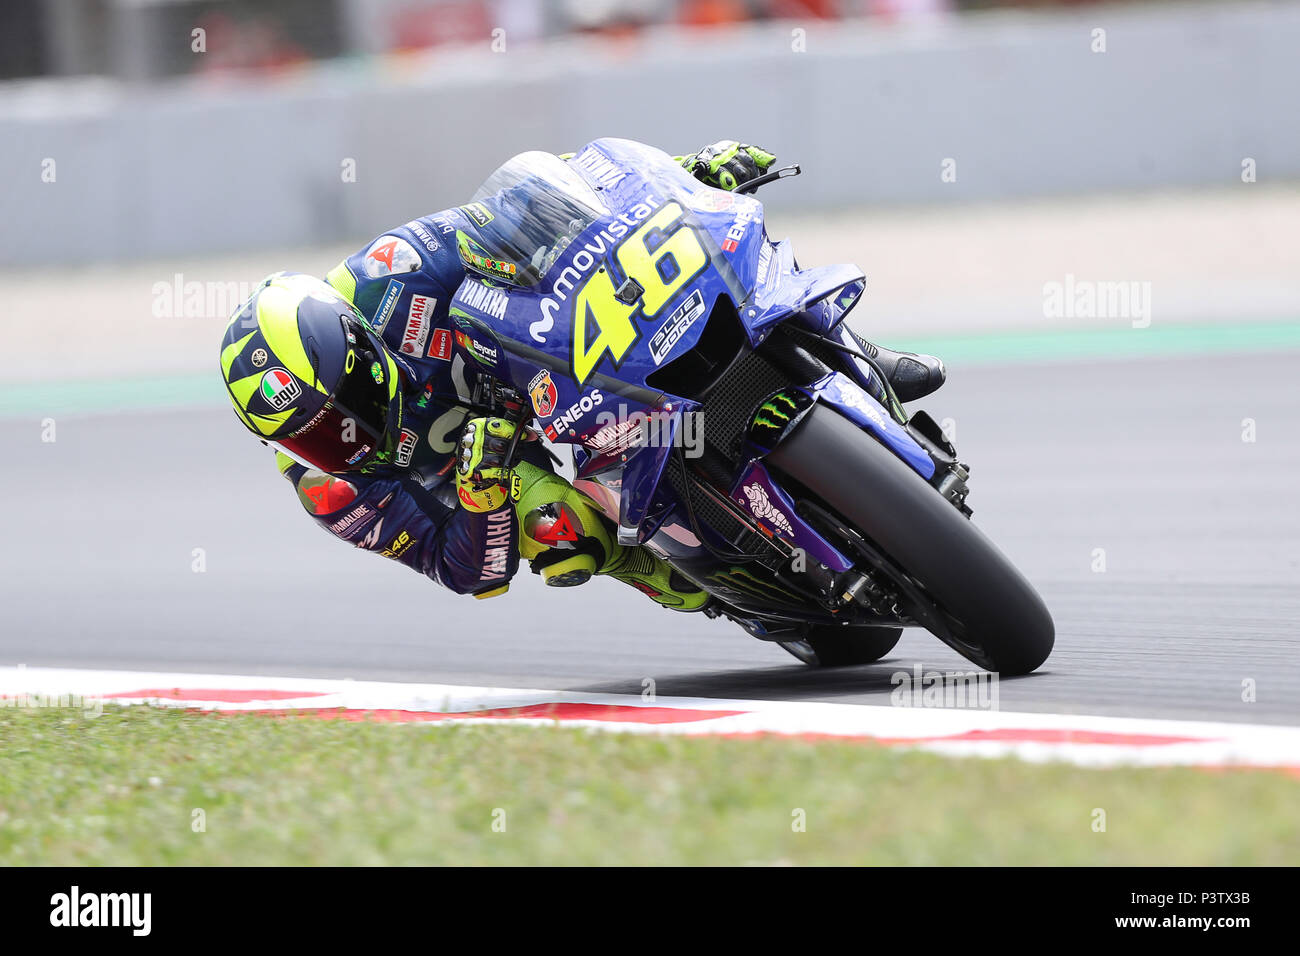 June 15, 2018 - Montmelo, Catalunya, Spain - Valentino ROSSI of Italy and Movistar Yamaha MotoGp competes during Gran Premi Monster Energy de Catalunya (Grand Prix of Catalunya), MotoGP free practrice, on June 16, 2018 at the Catalunya racetrack in Montmelo, near Barcelona, Spain (Credit Image: © Manuel Blondeau via ZUMA Wire) Stock Photo